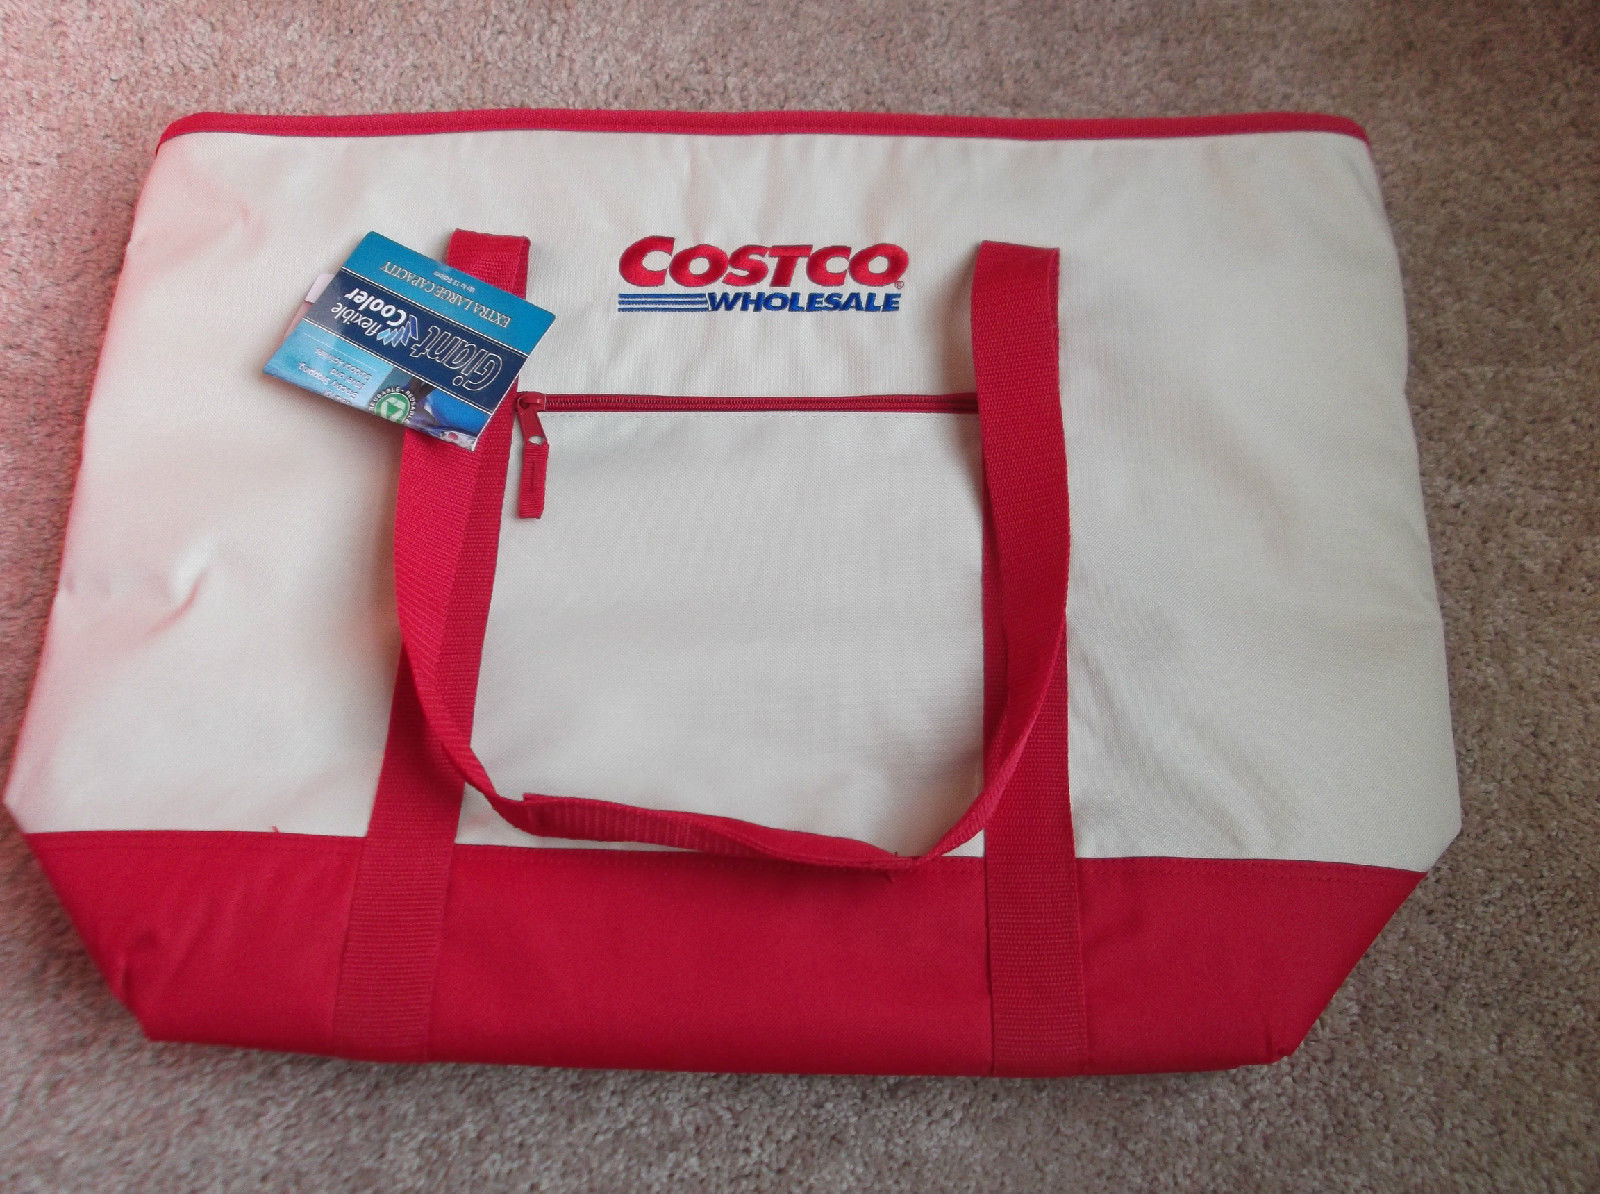 Costco's Frozen Food Tote Bag is back - Red at $7